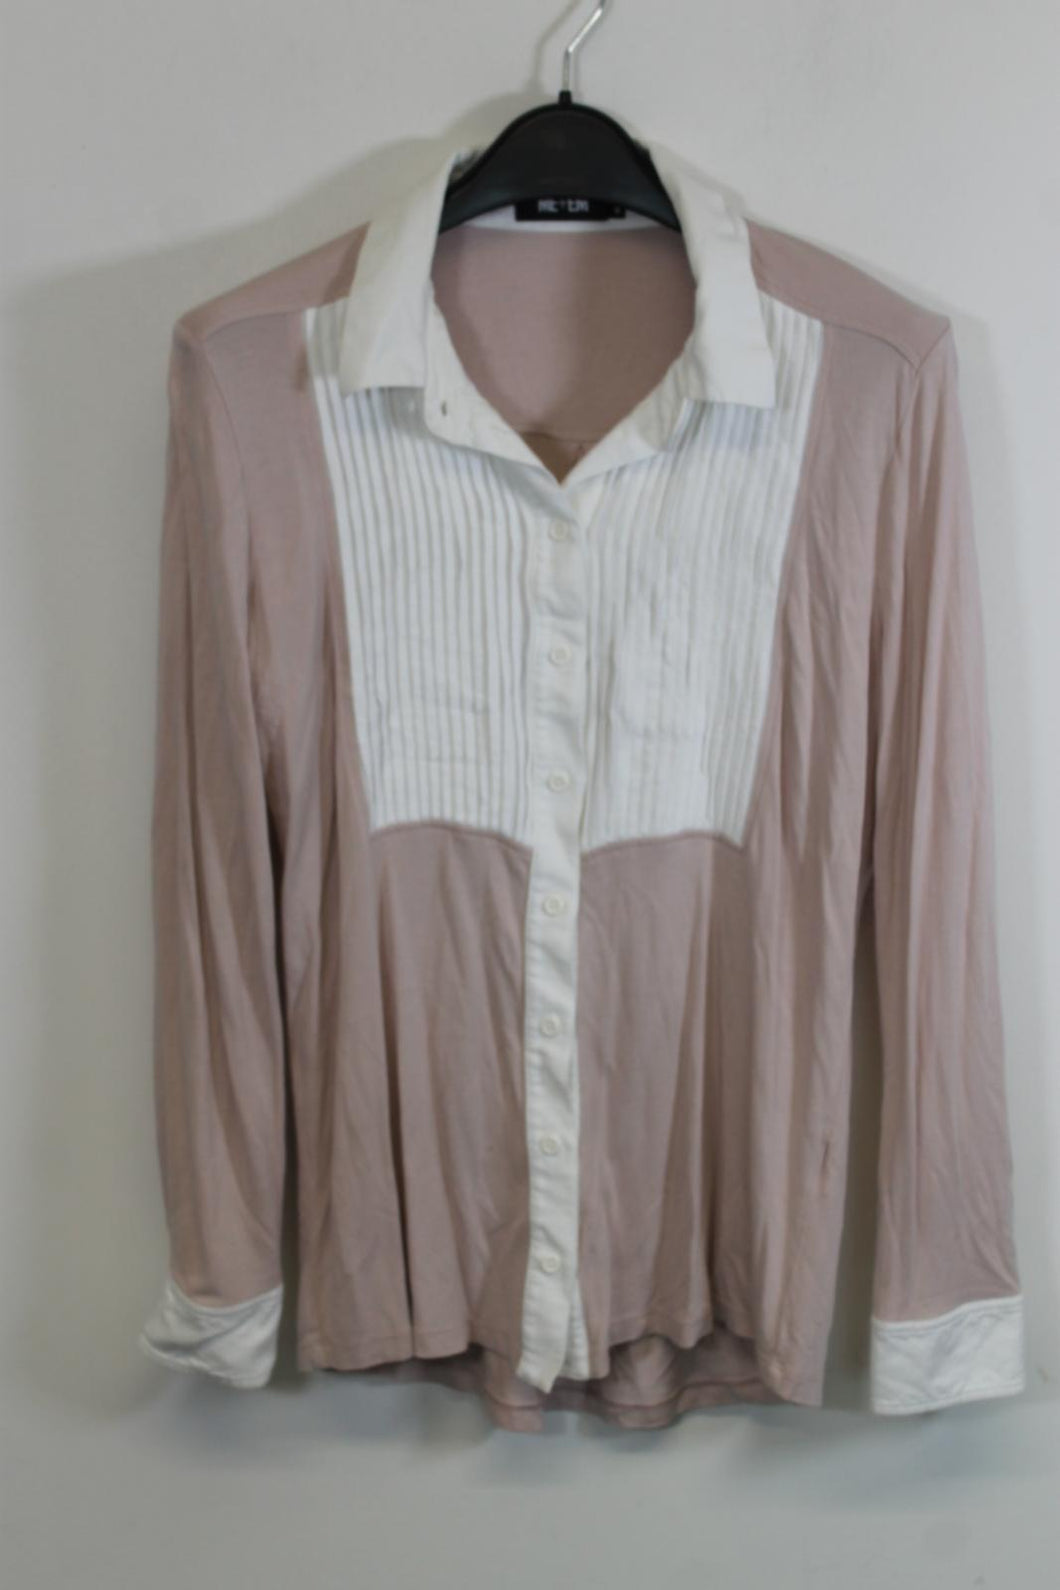 ME Ladies Pink Long Sleeve Button Down Shirt Size M